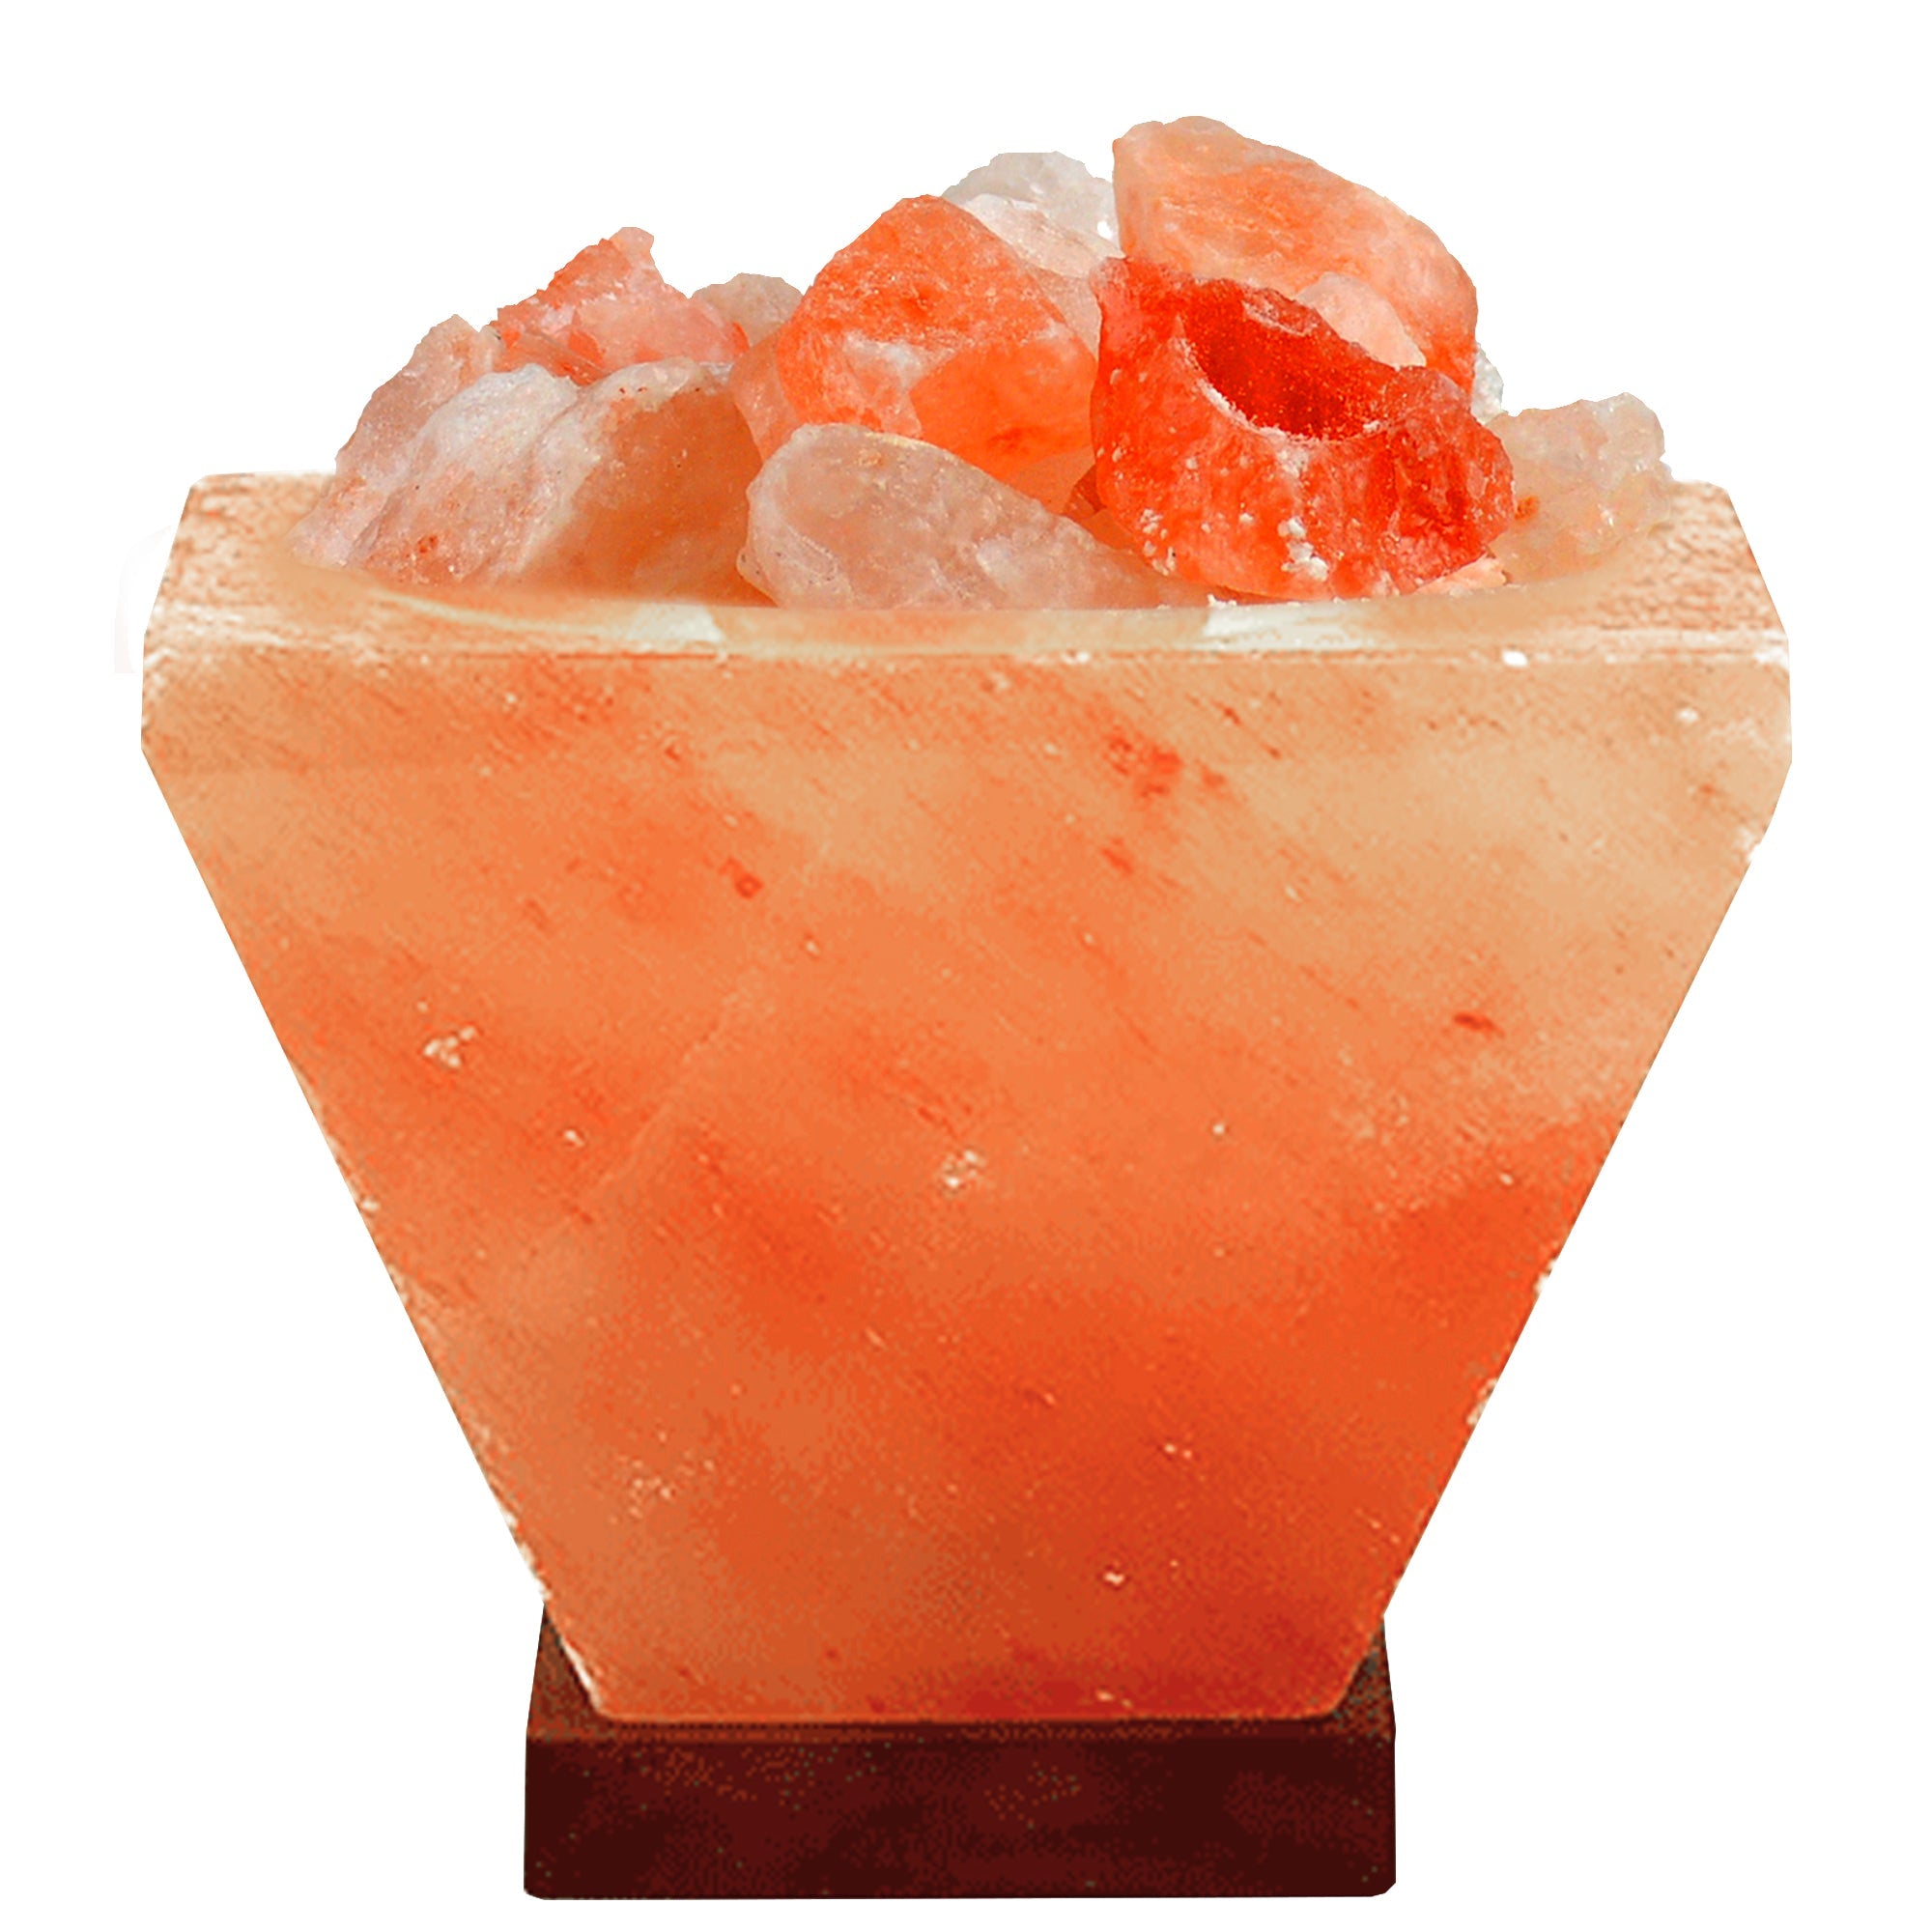 This beautiful crucible fire bowl salt lamp takes the look of a fire pit of Himalayan salt, creating a magnificent effect when lit.